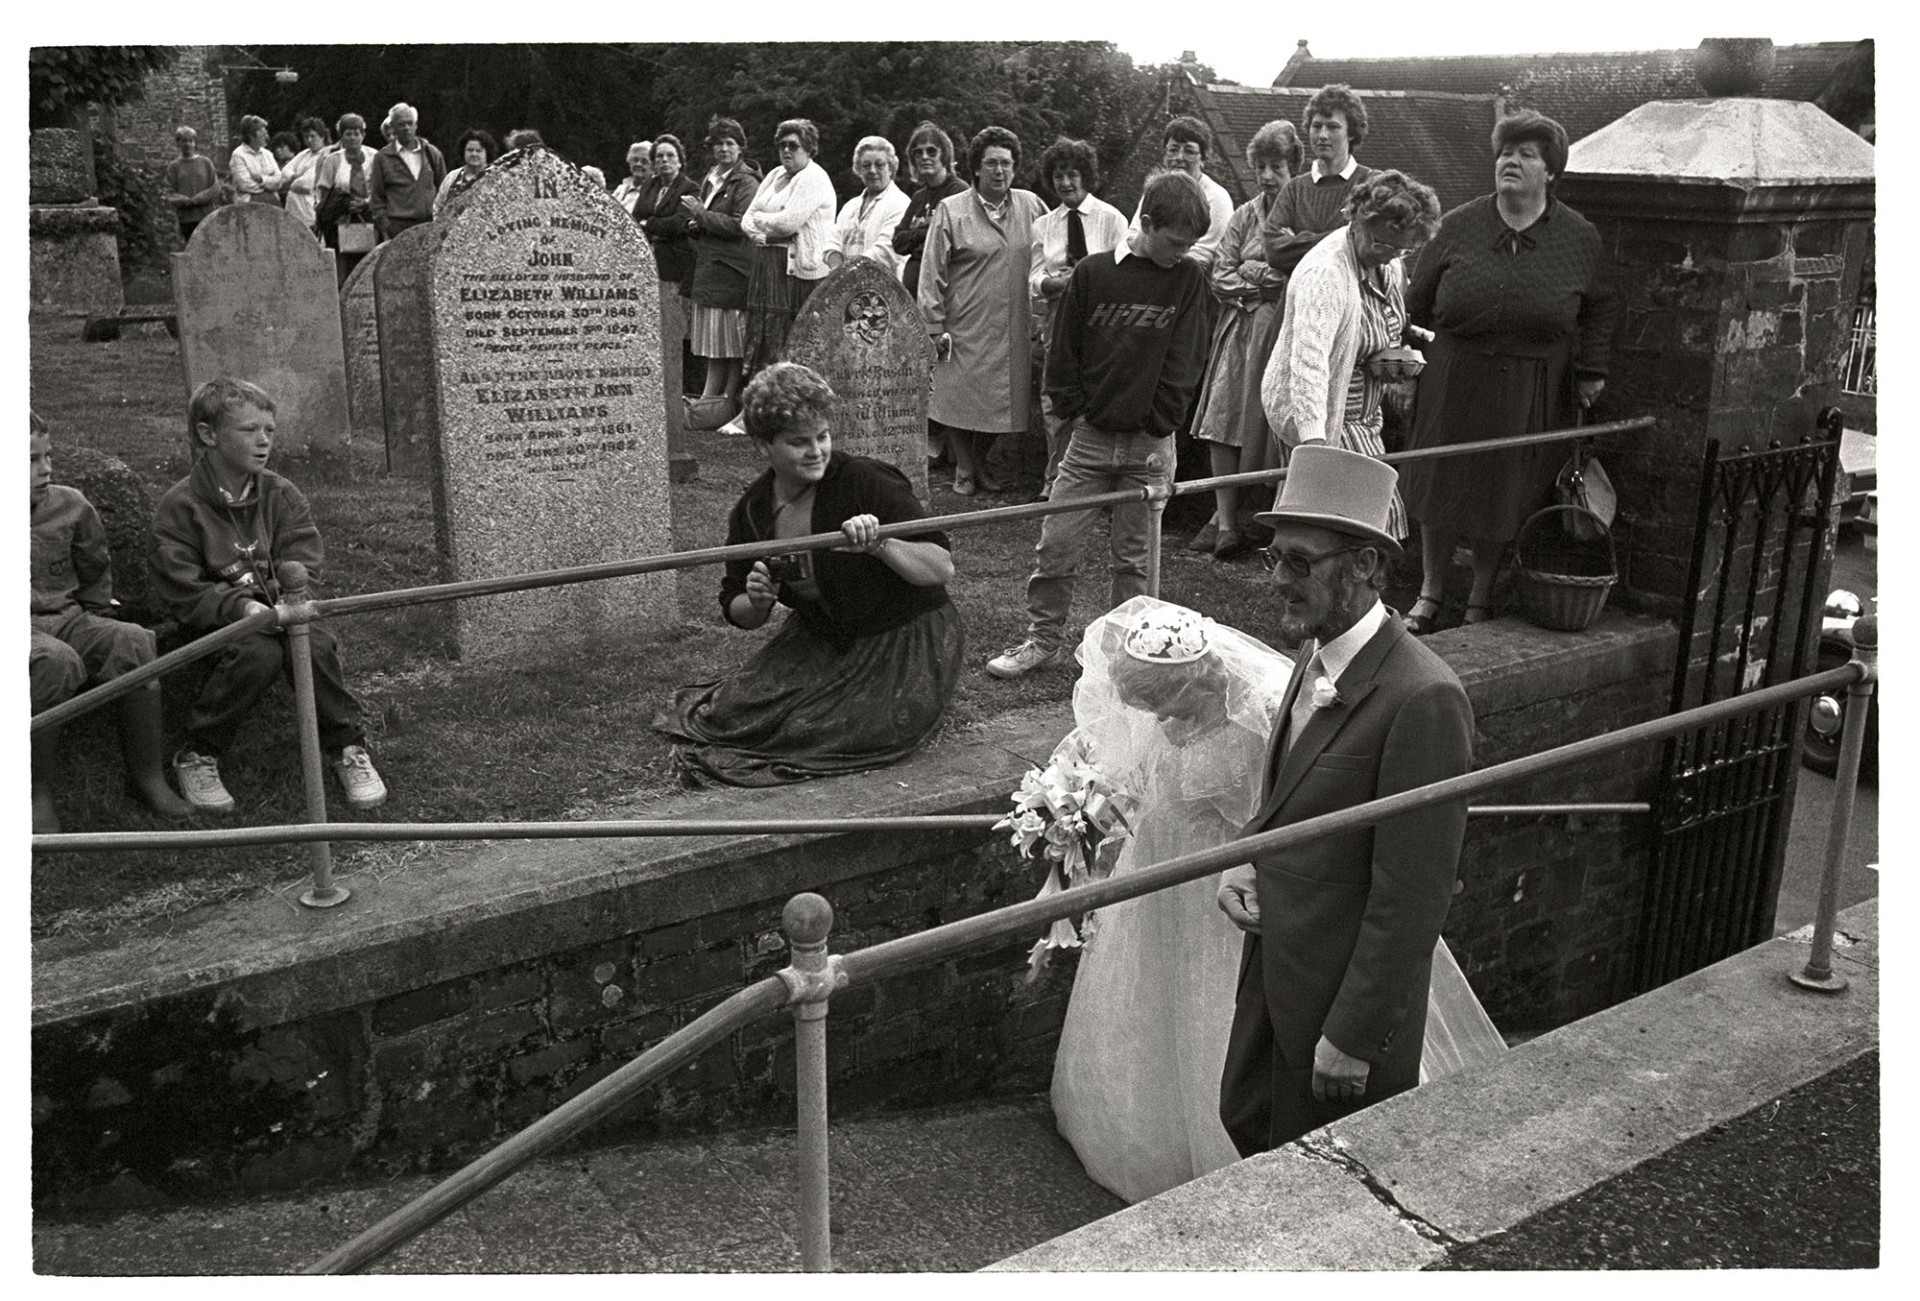 Onlookers at wedding, bride and father arriving in top hat. 
[Onlookers gathered in Chulmleigh churchyard to watch a bride and her father arrive for a wedding. The father of the bride is wearing a top hat.]